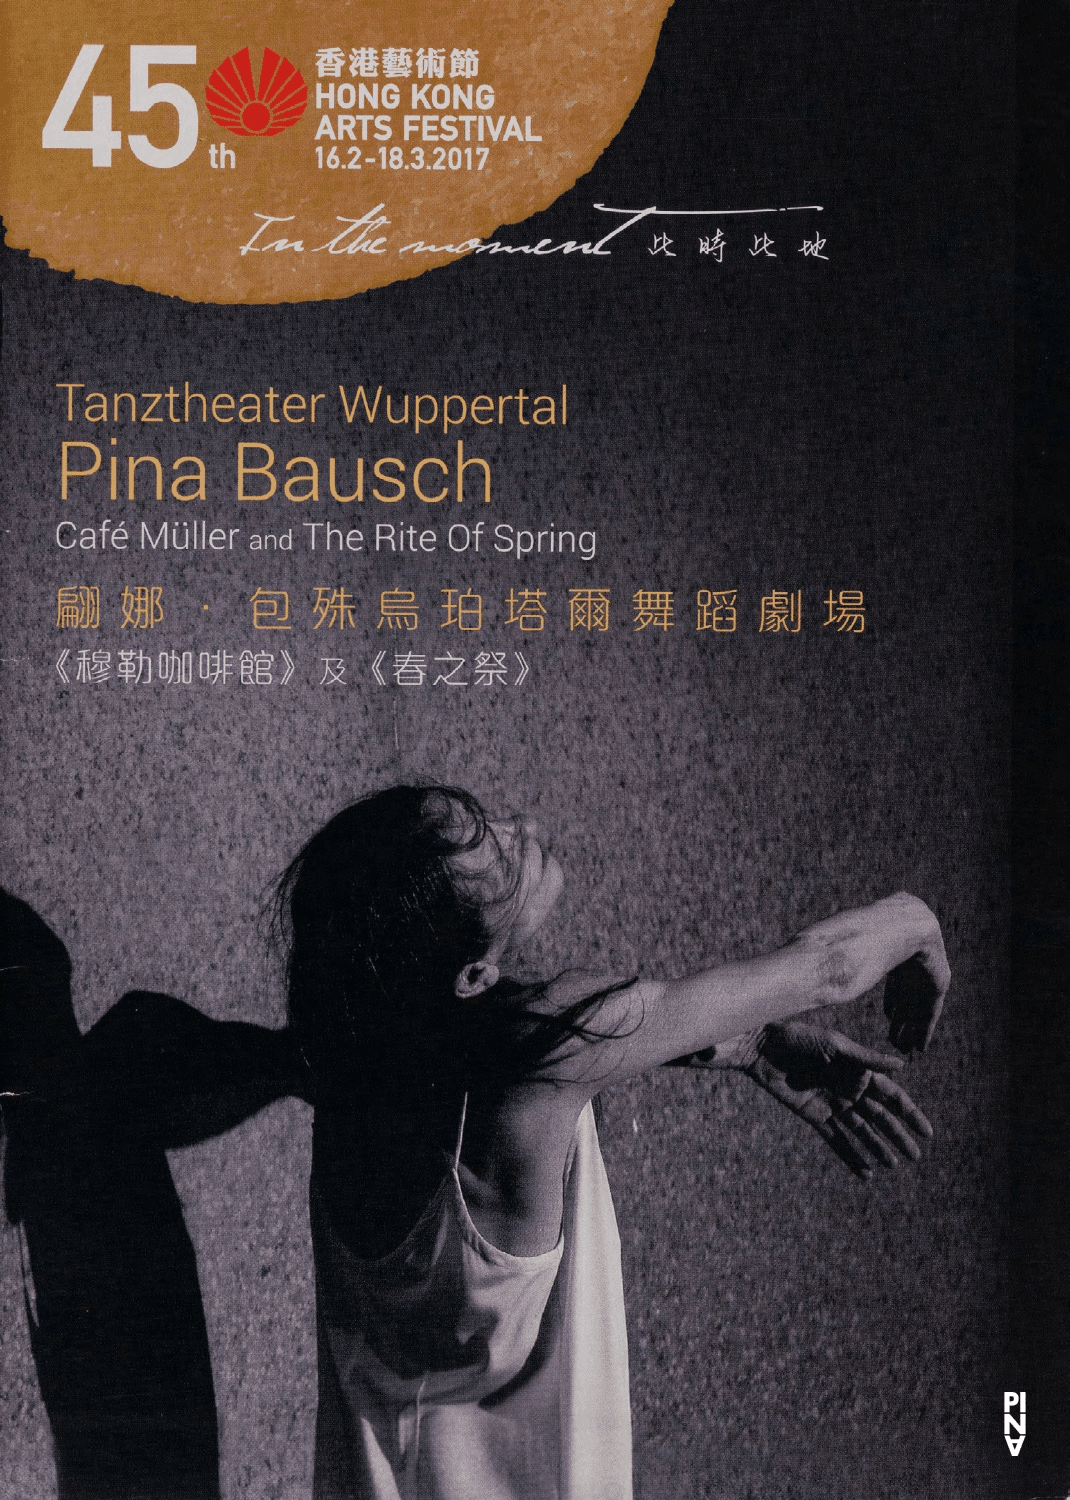 Booklet for “Café Müller” and “The Rite of Spring” by Pina Bausch with Tanztheater Wuppertal in in Hong Kong, 03/08/2017 – 03/11/2017